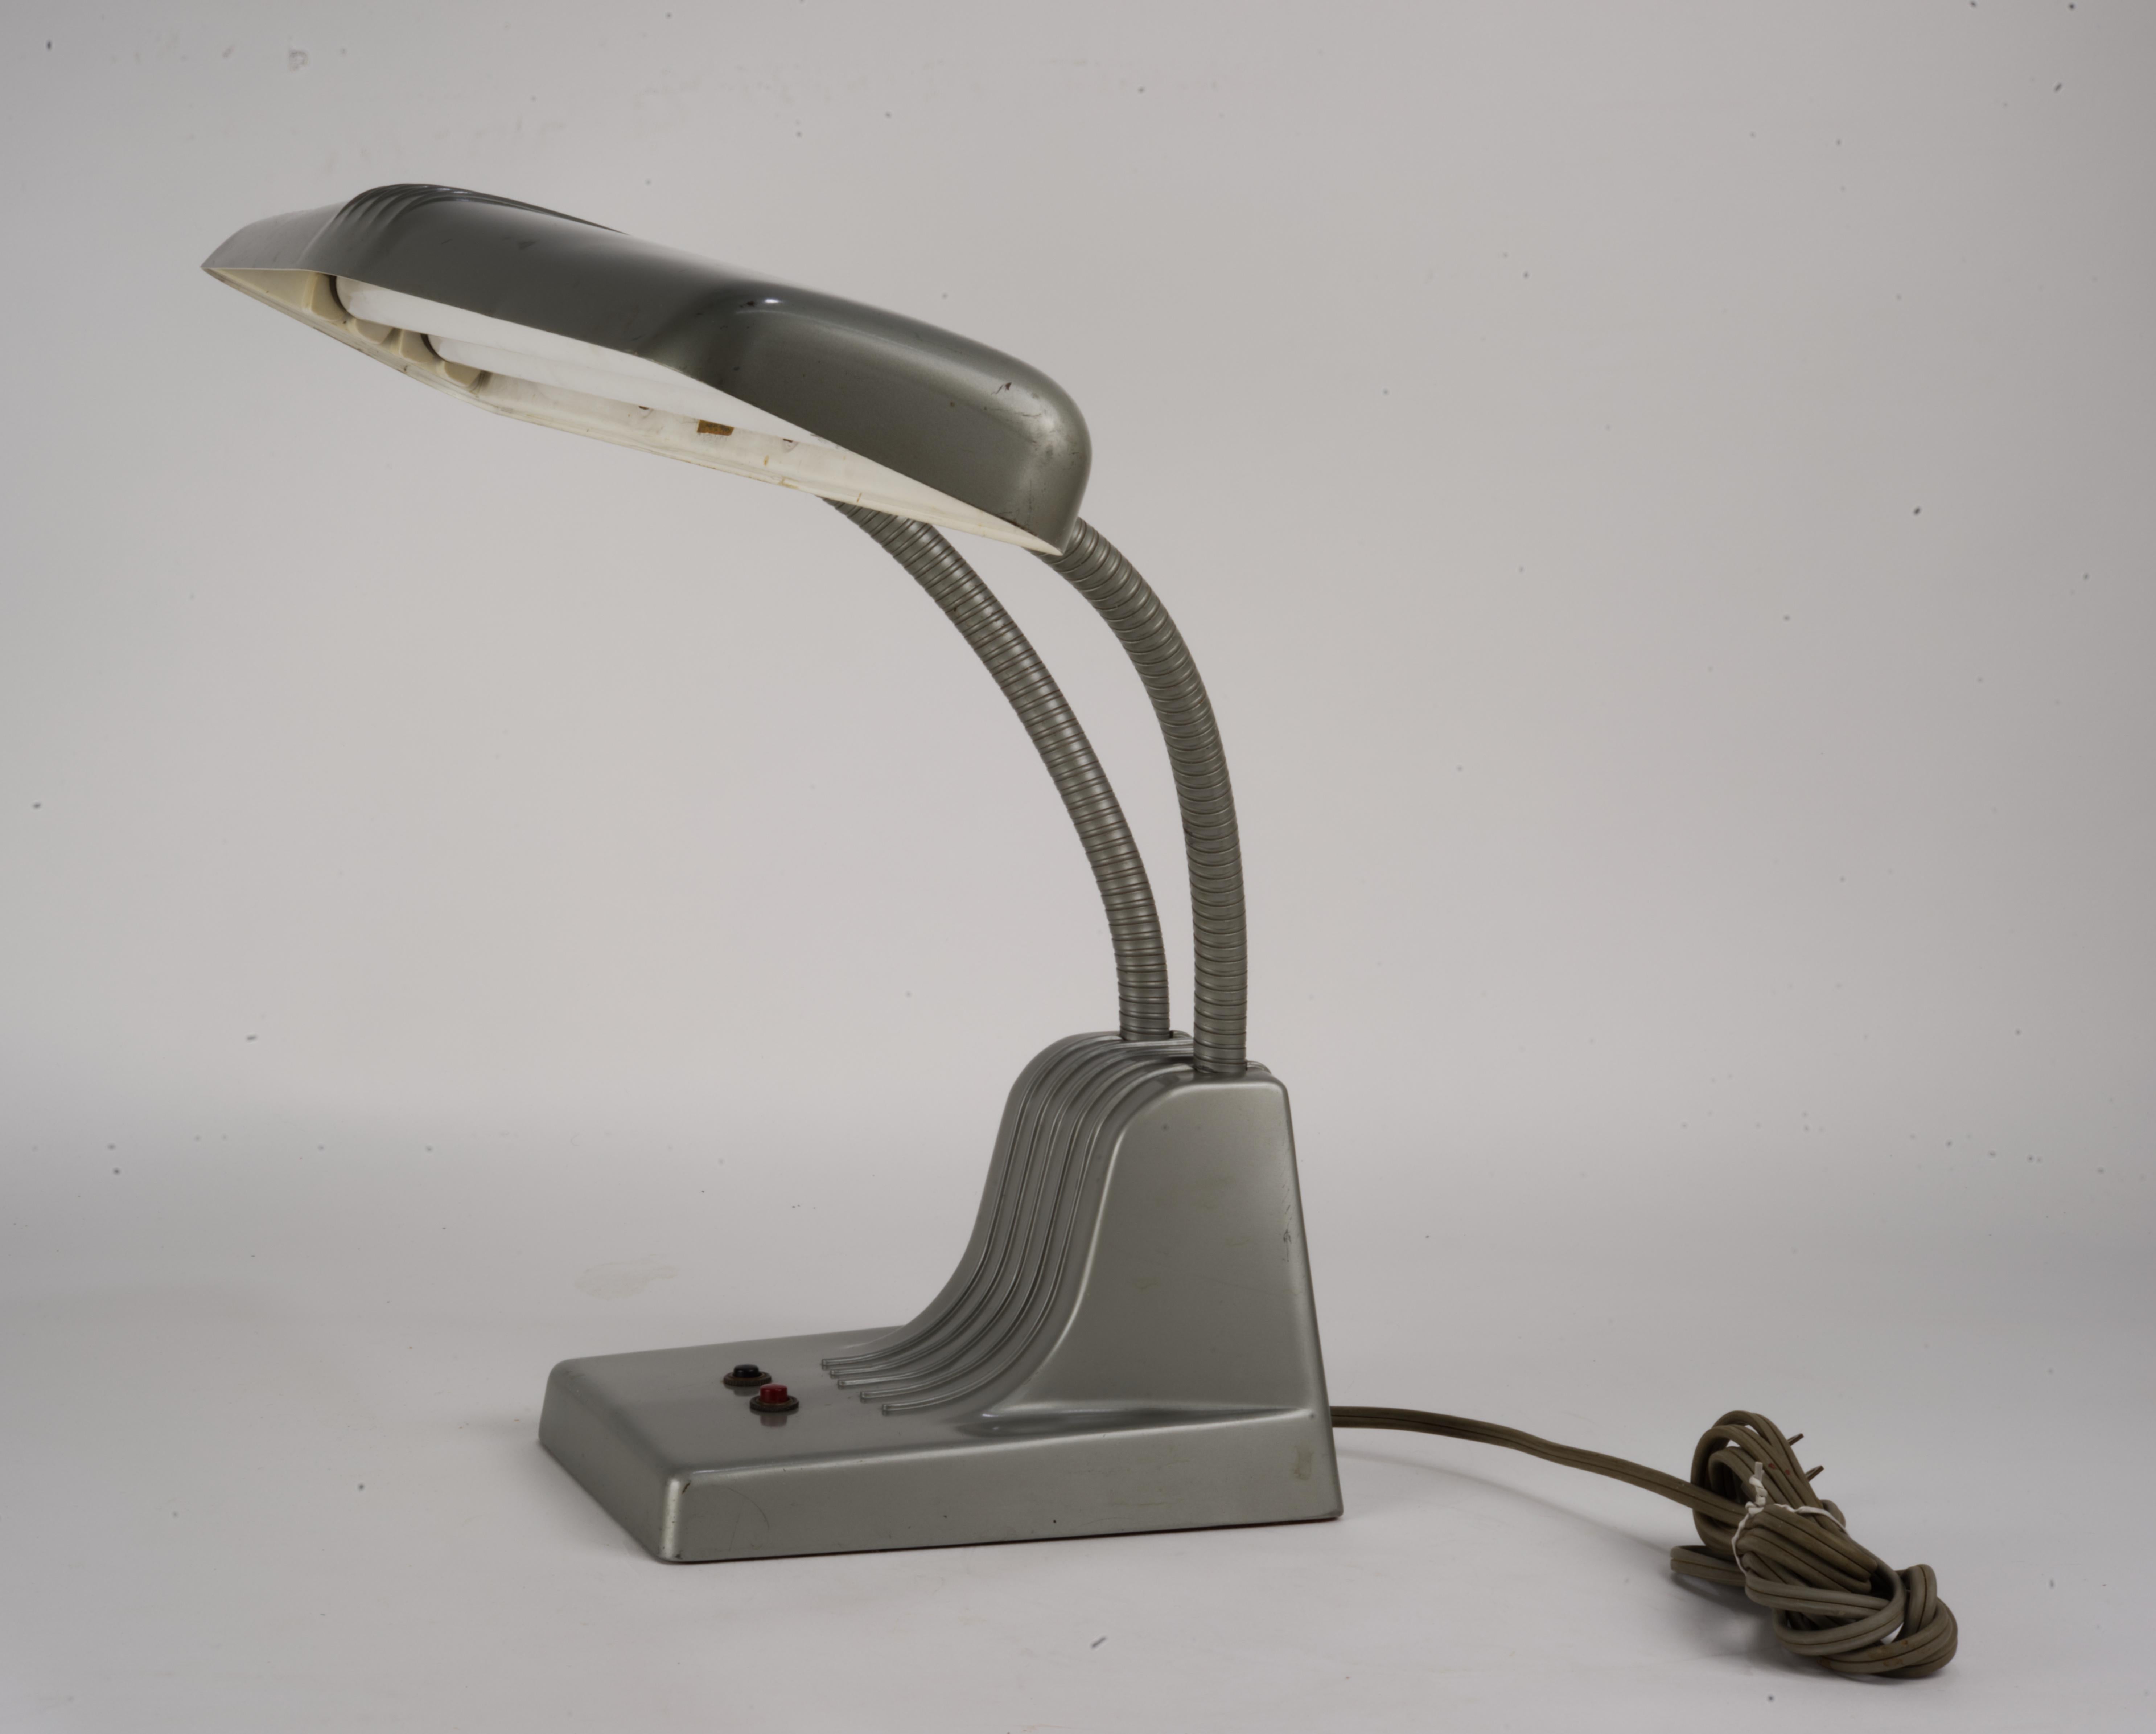 Classic Industrial Dazor 1000 design. 
Highly adjustable shell. Double flourecent 15watt bulbs (available from many hardware stores or online) 
Paint has a few scuffs but not terrible. Lamp works well and hasn't been rewired. 
